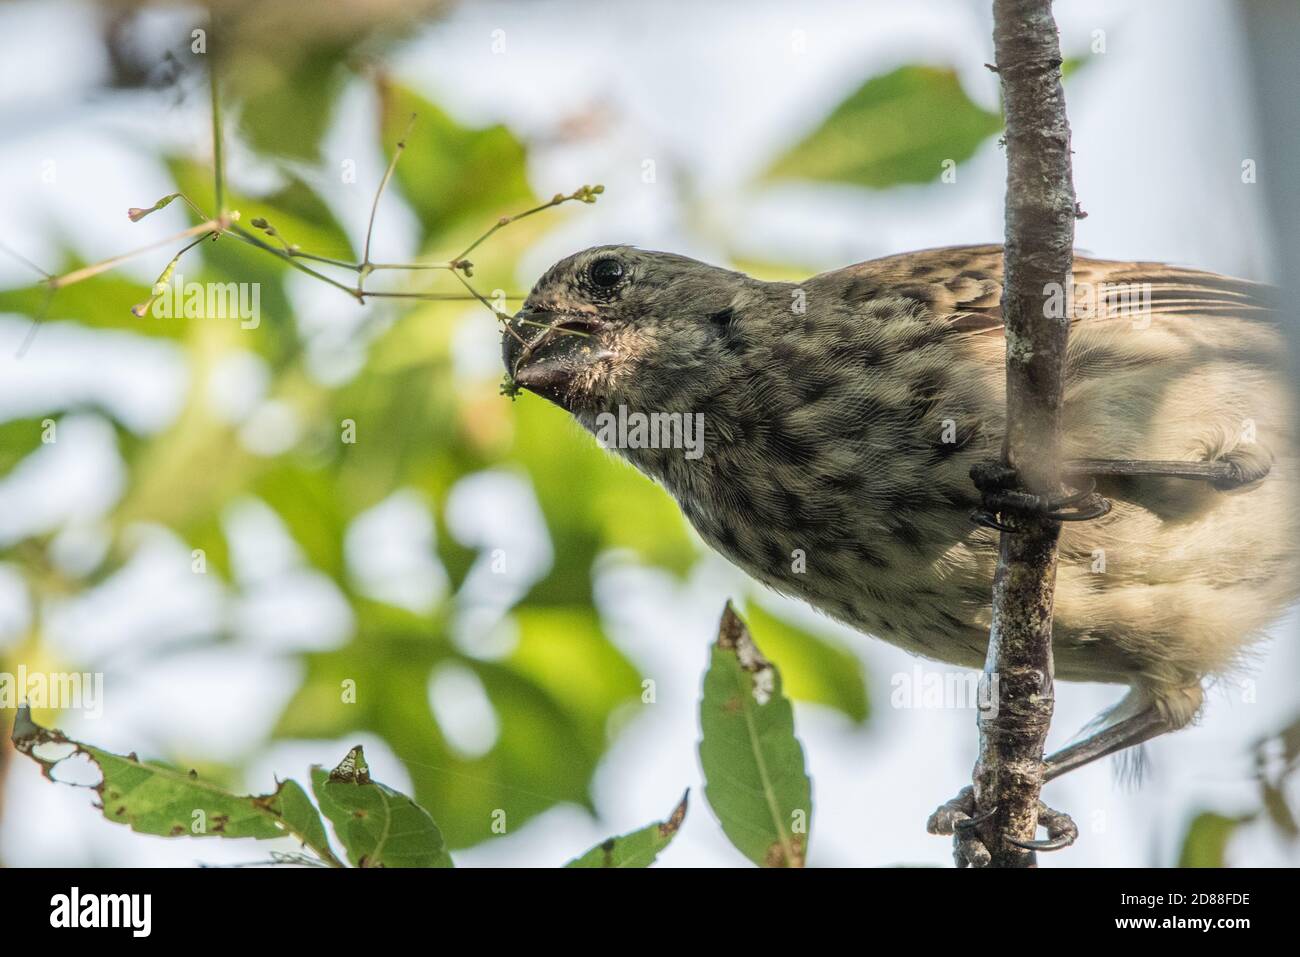 The large tree finch (Camarhynchus psittacula) one of Darwin's finches from the Galapagos islands feeding on seeds. Stock Photo